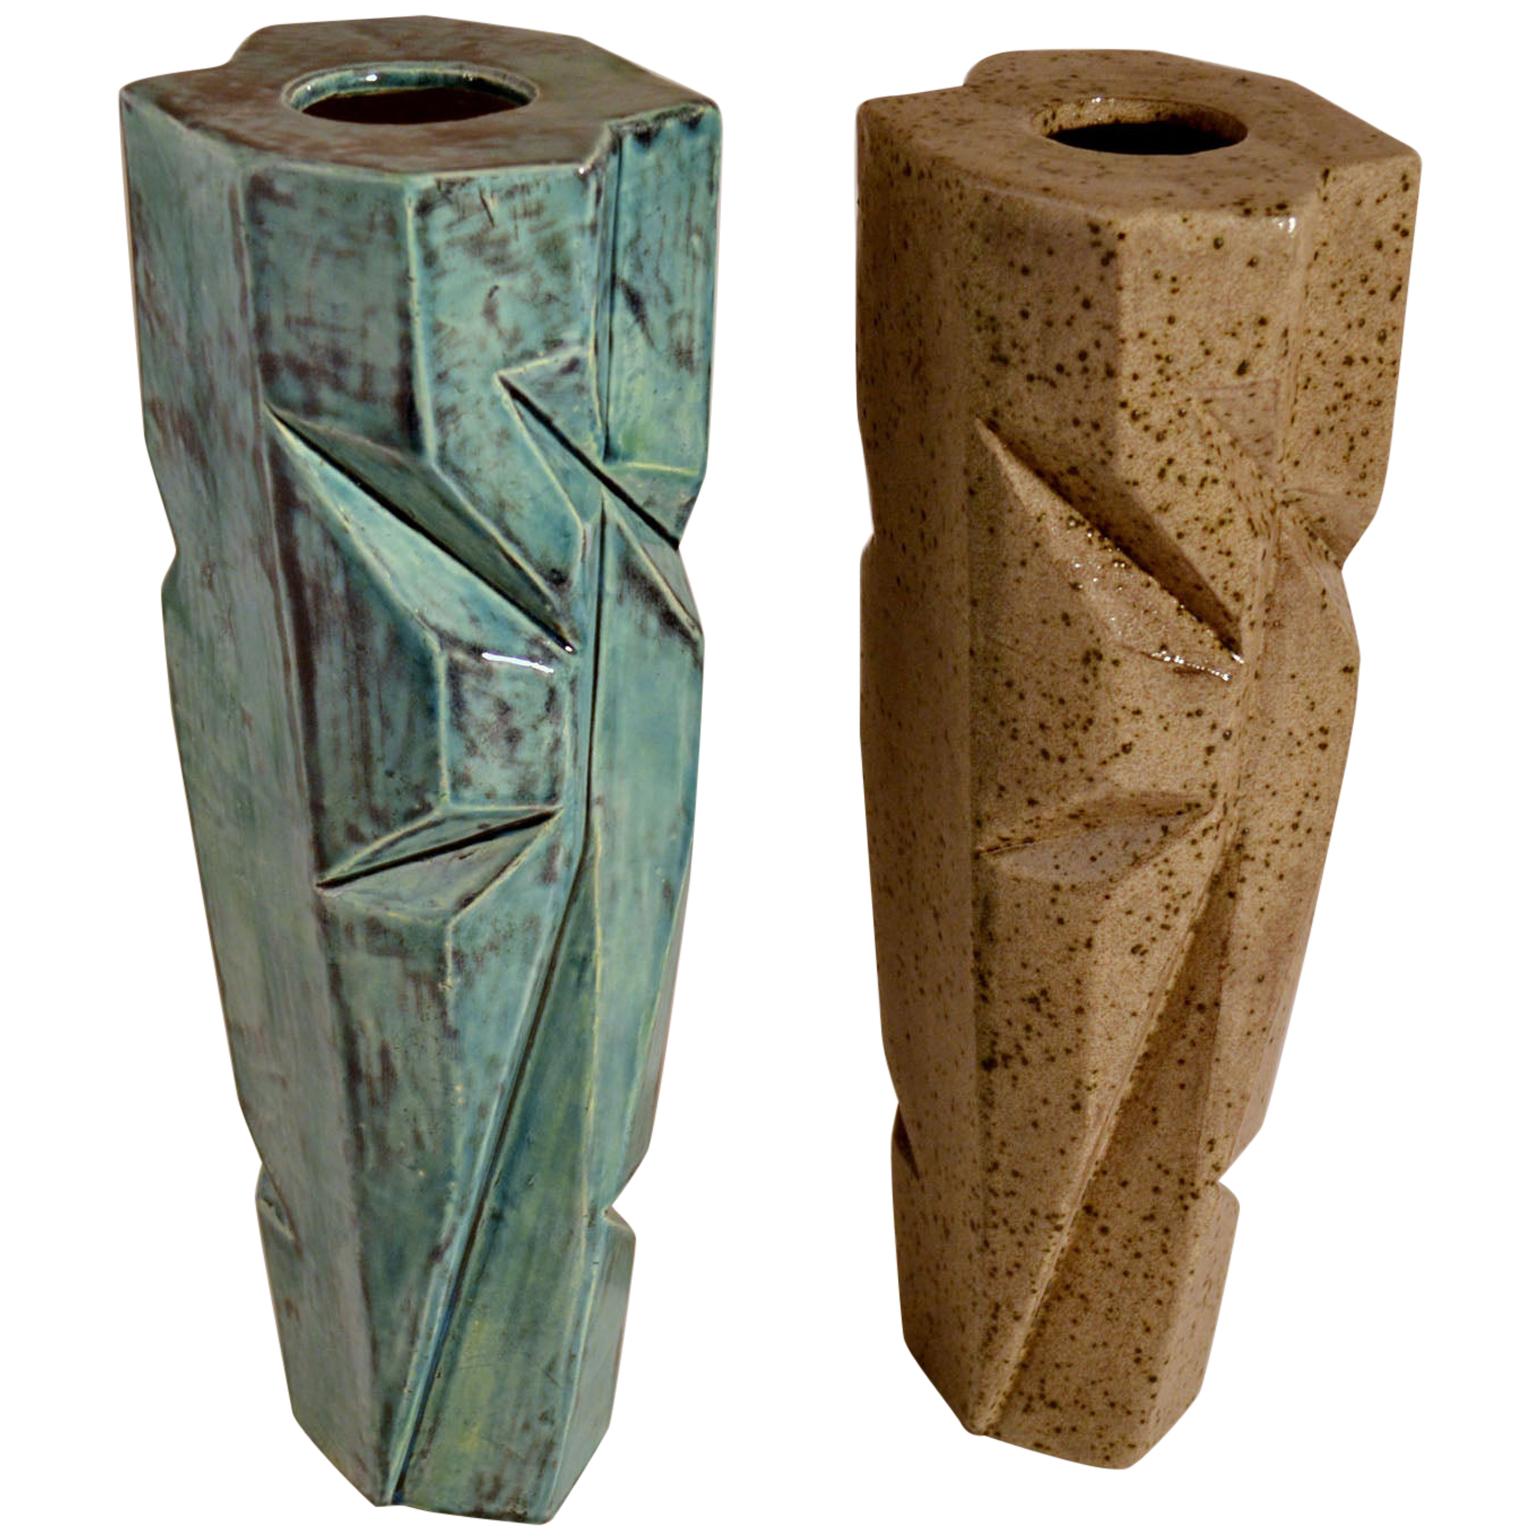 Pair of sculptural Studio Pottery Vases in Blue and Beige Glaze